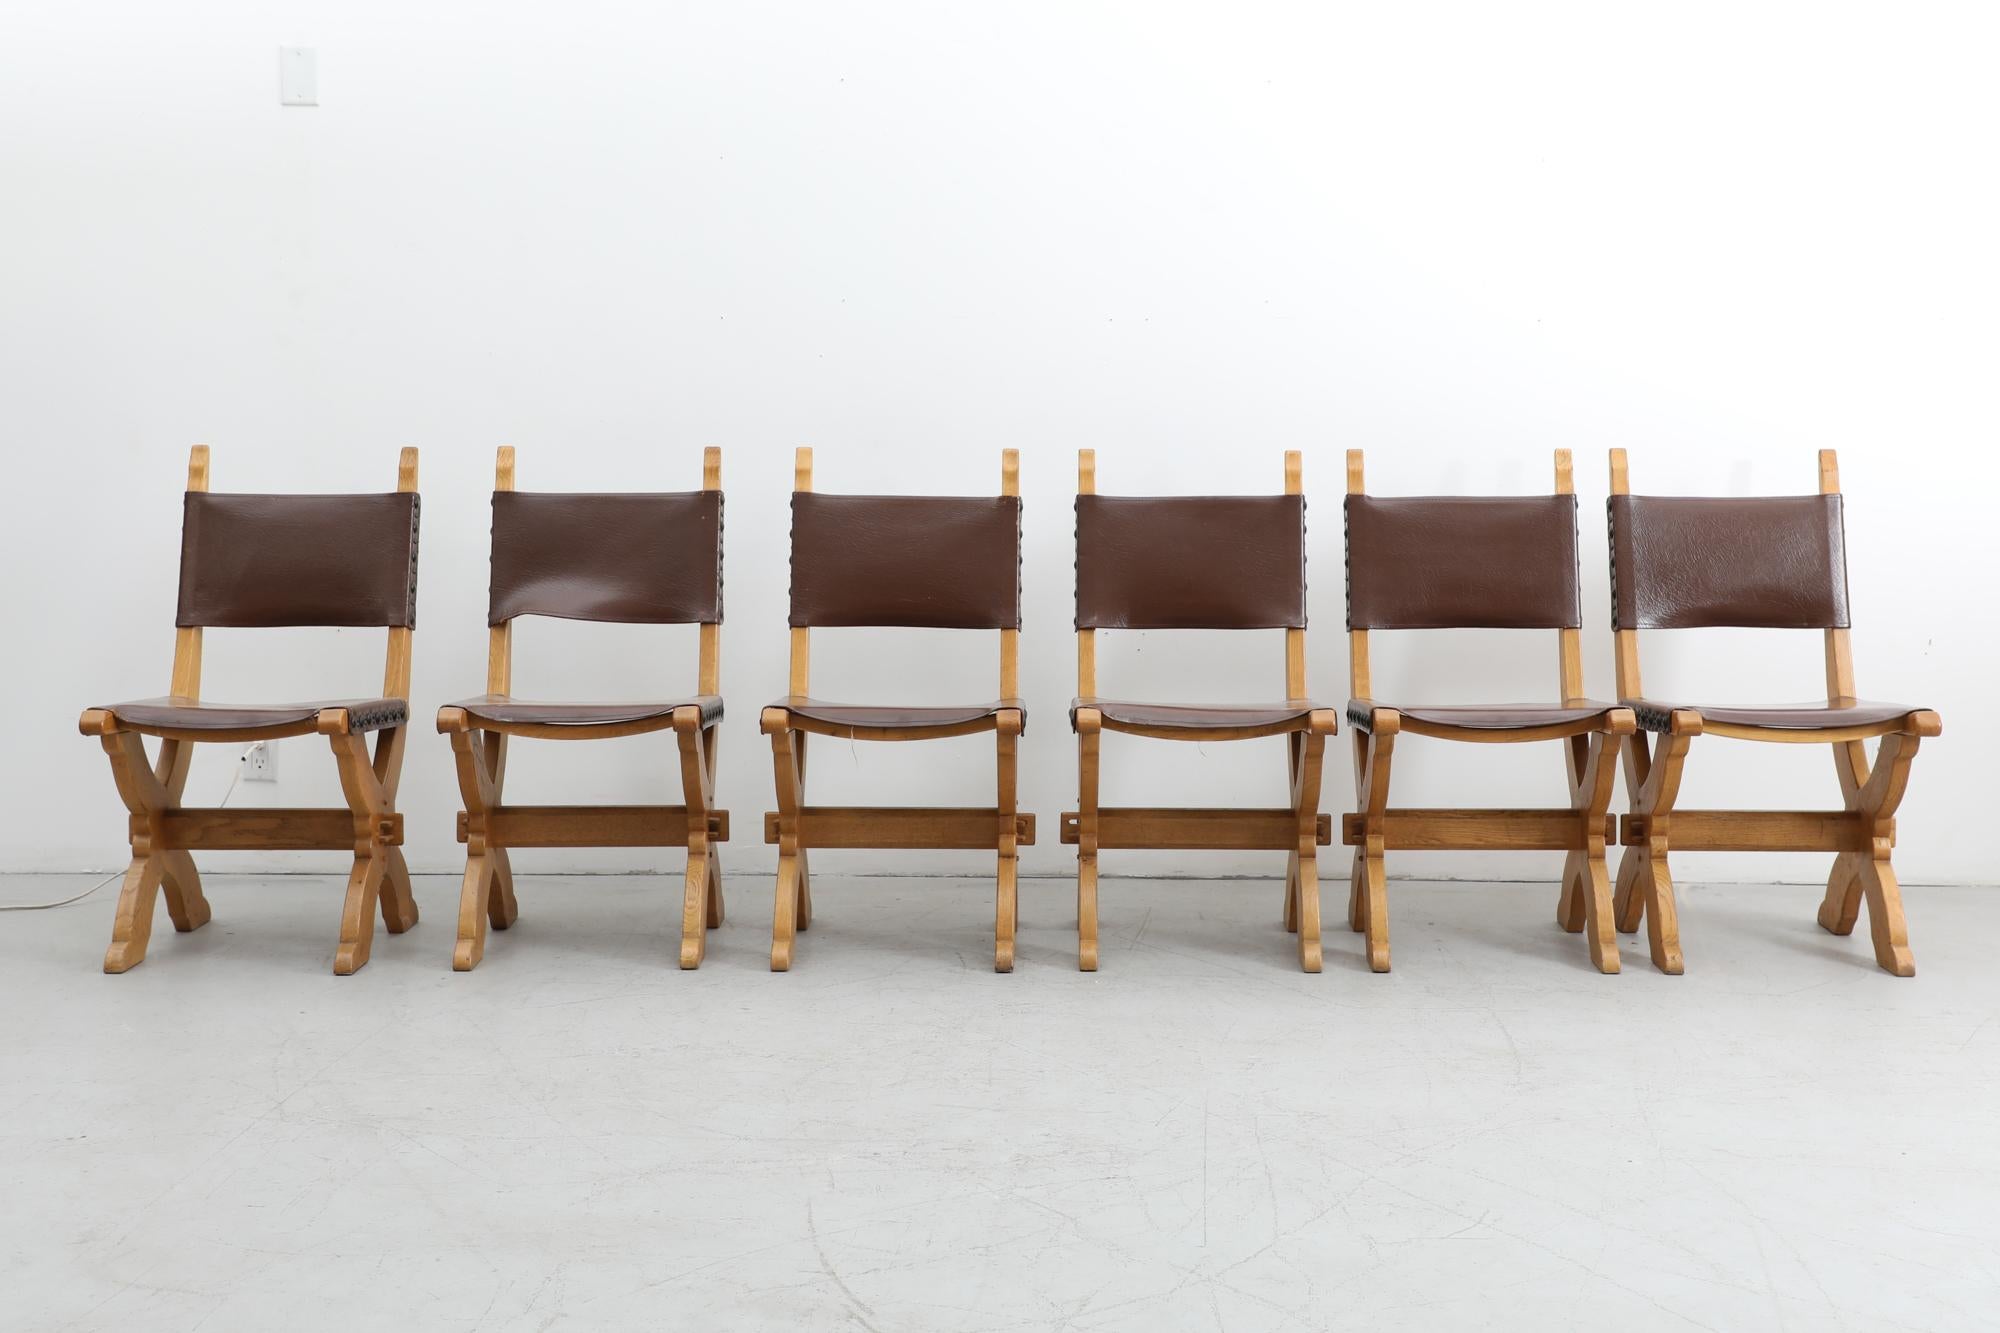 Brutalist dining chairs, Dutch design by Bram Sprij for Sprij Meubelen Holland from the 1960s. Solid Oak frame and leather seating. The chairs have an attribution mark. In original condition with visible wear consistent with their age and use.